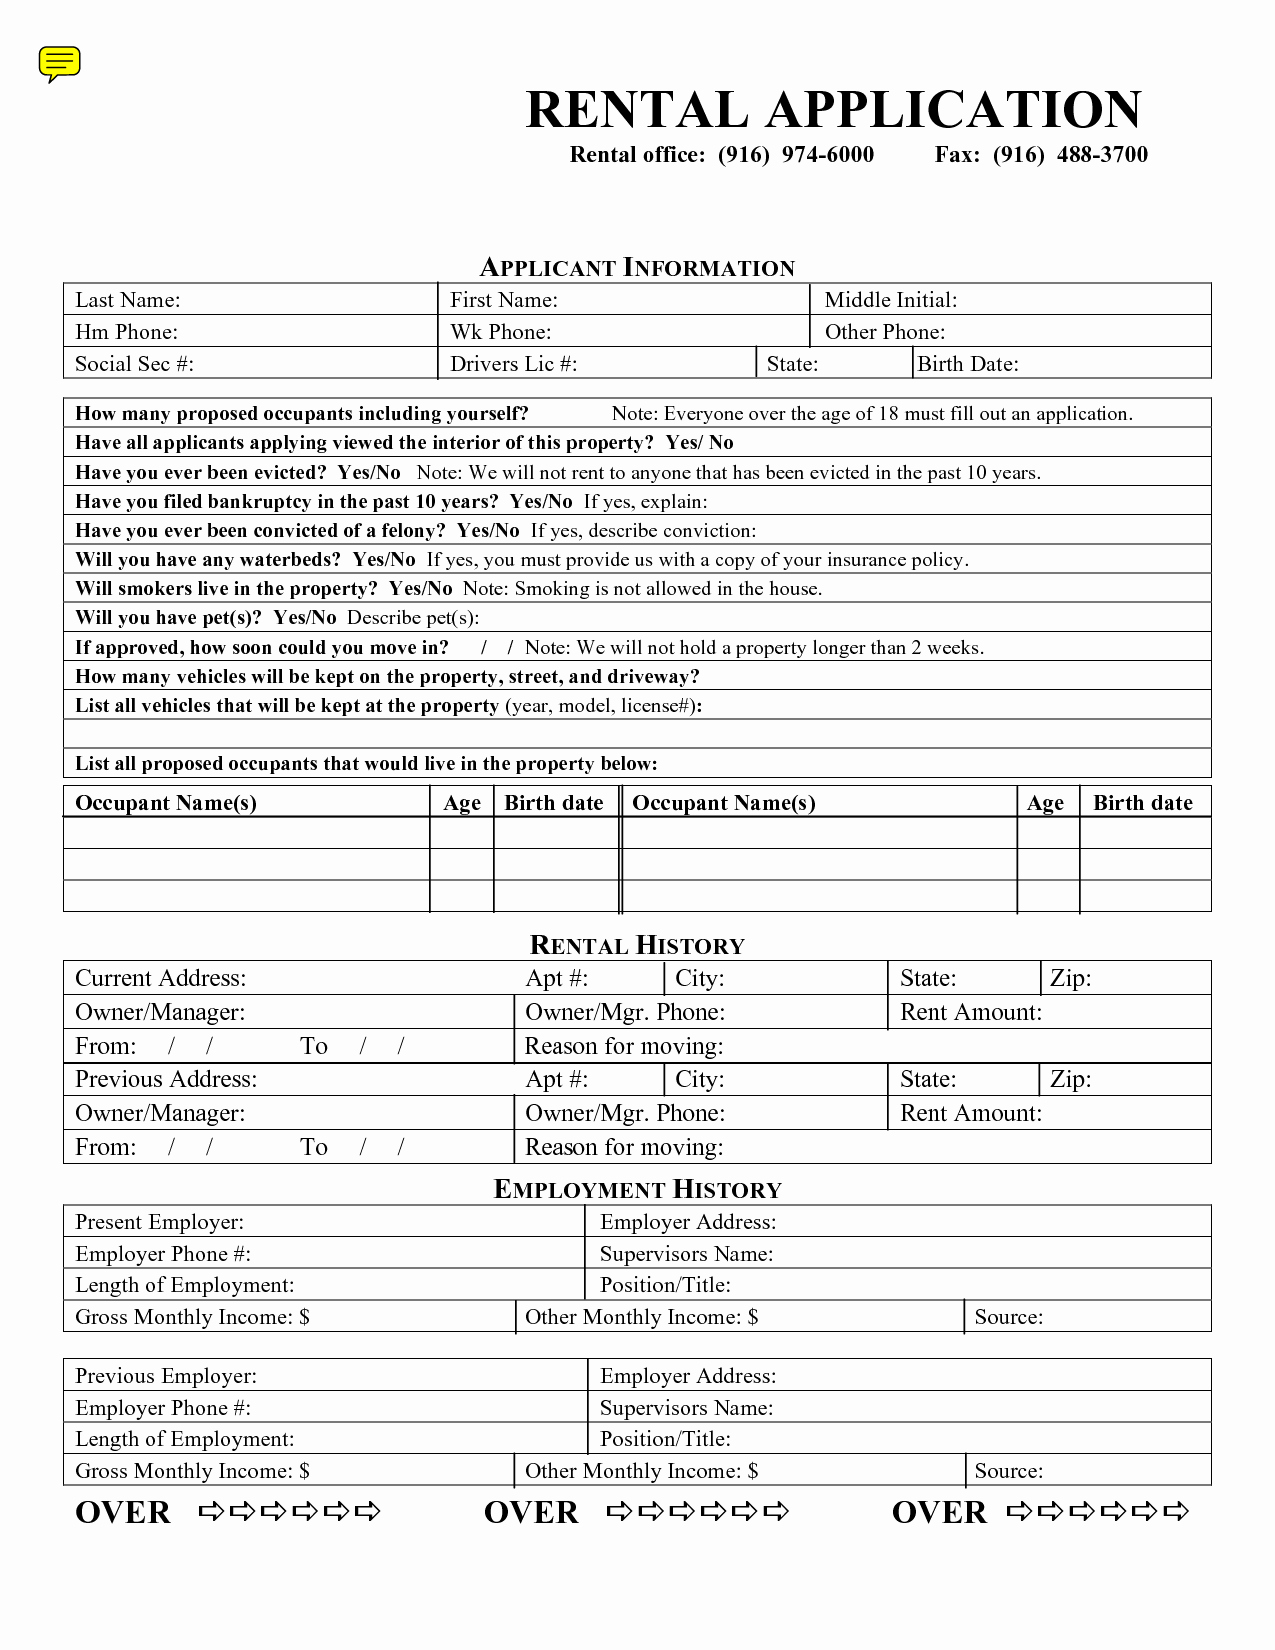 Free Rental Application form New Free Rental Application form by Mary Jmenintigar House